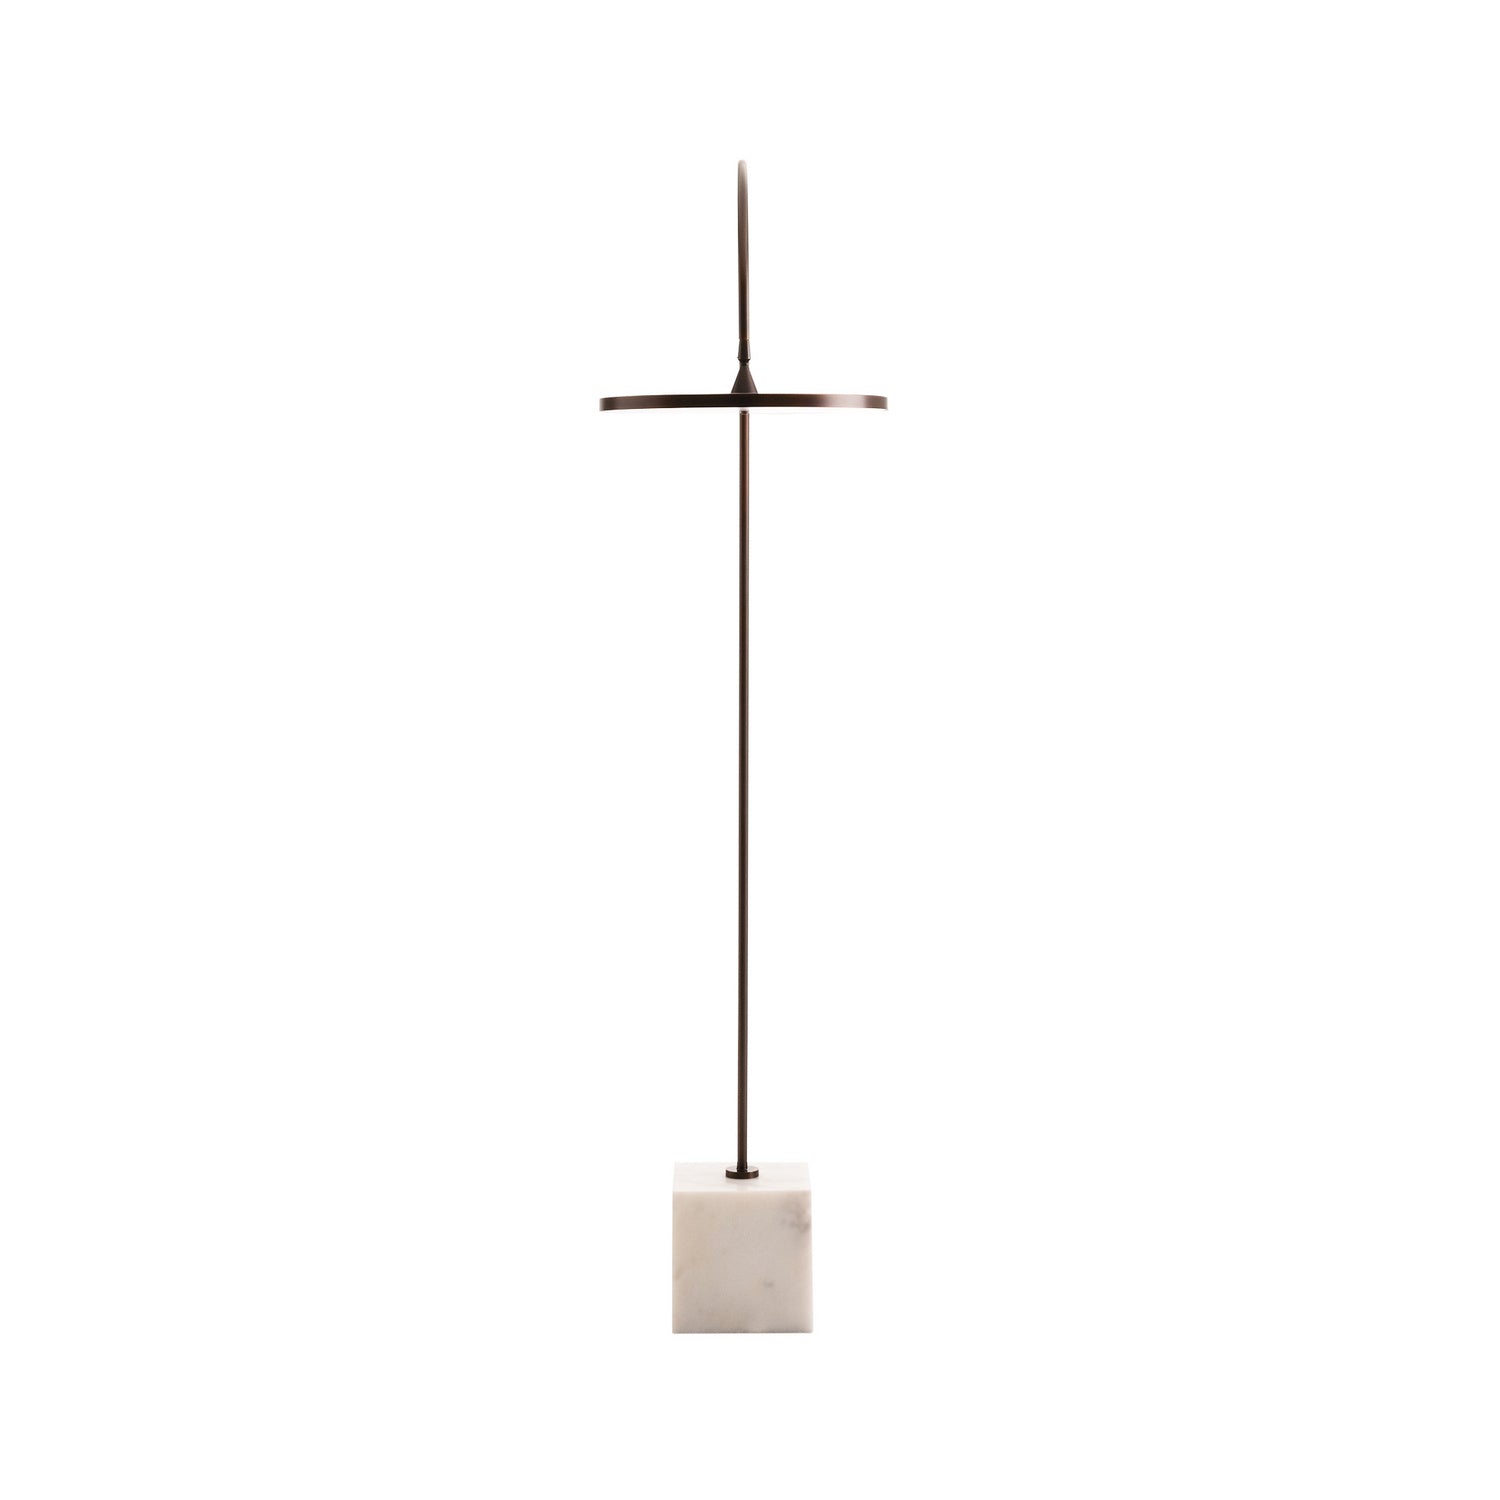 LED Floor Lamp from the Nuri collection in English Bronze finish